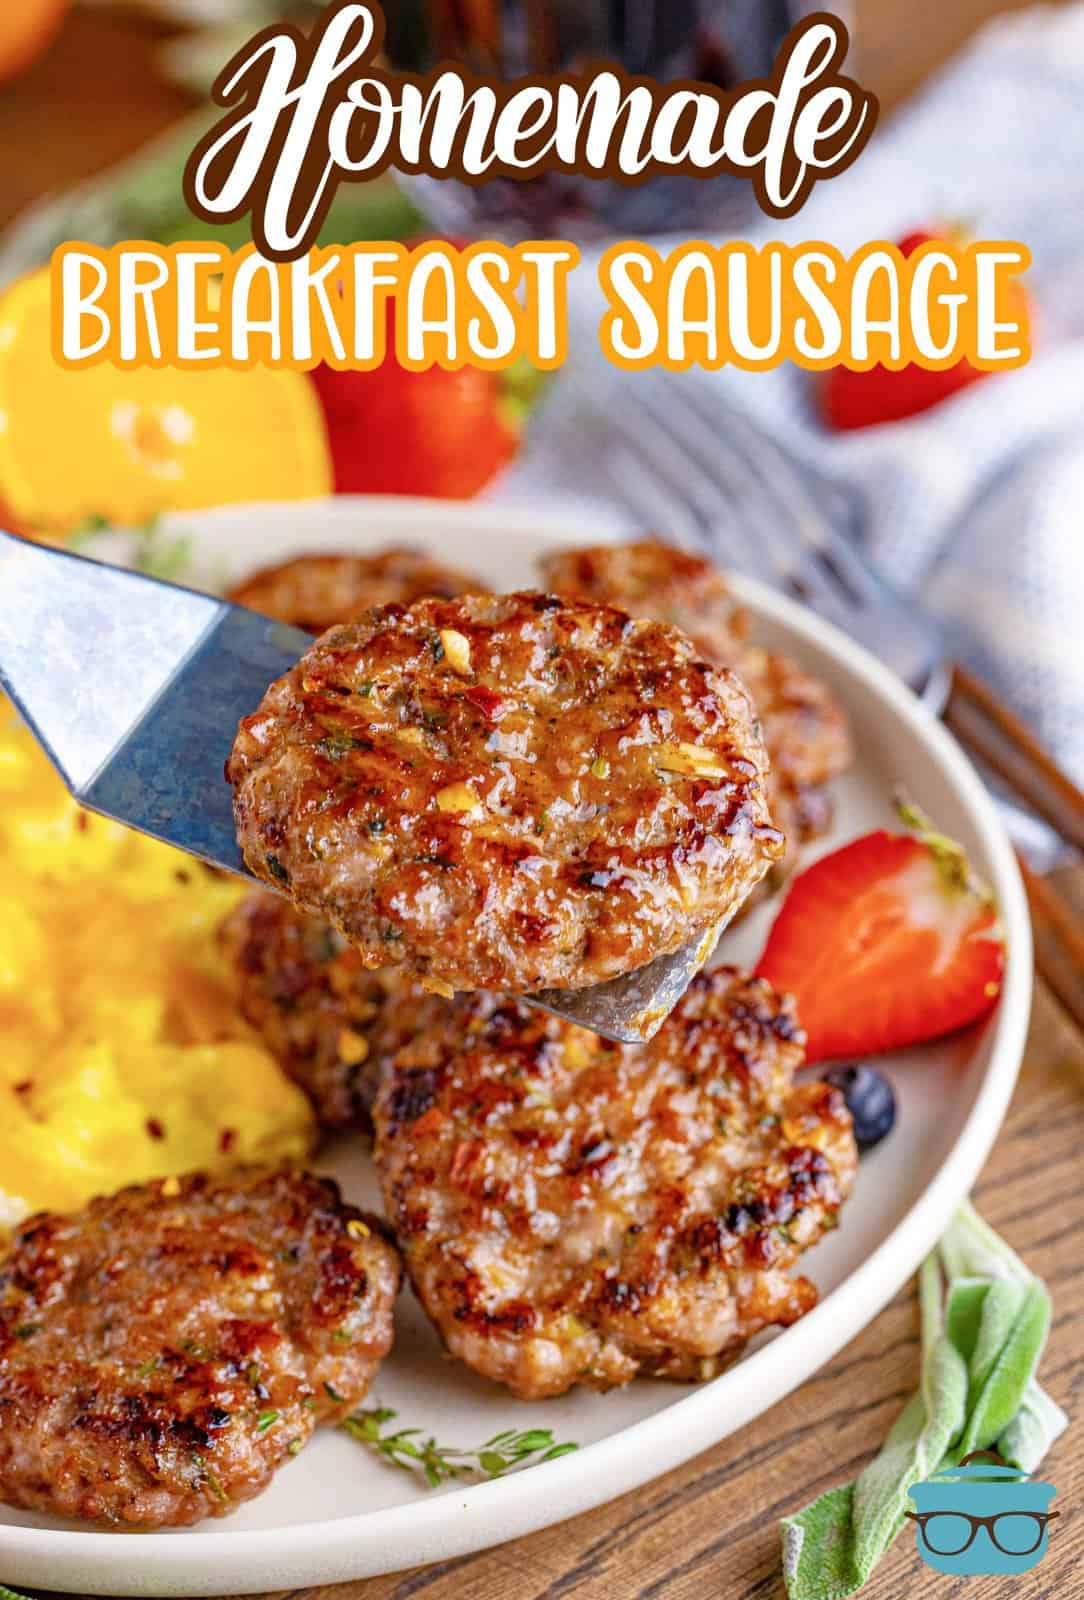 Pinterest image of Homemade Breakfast Sausage being held up with metal spatula over plate with eggs and fruit.